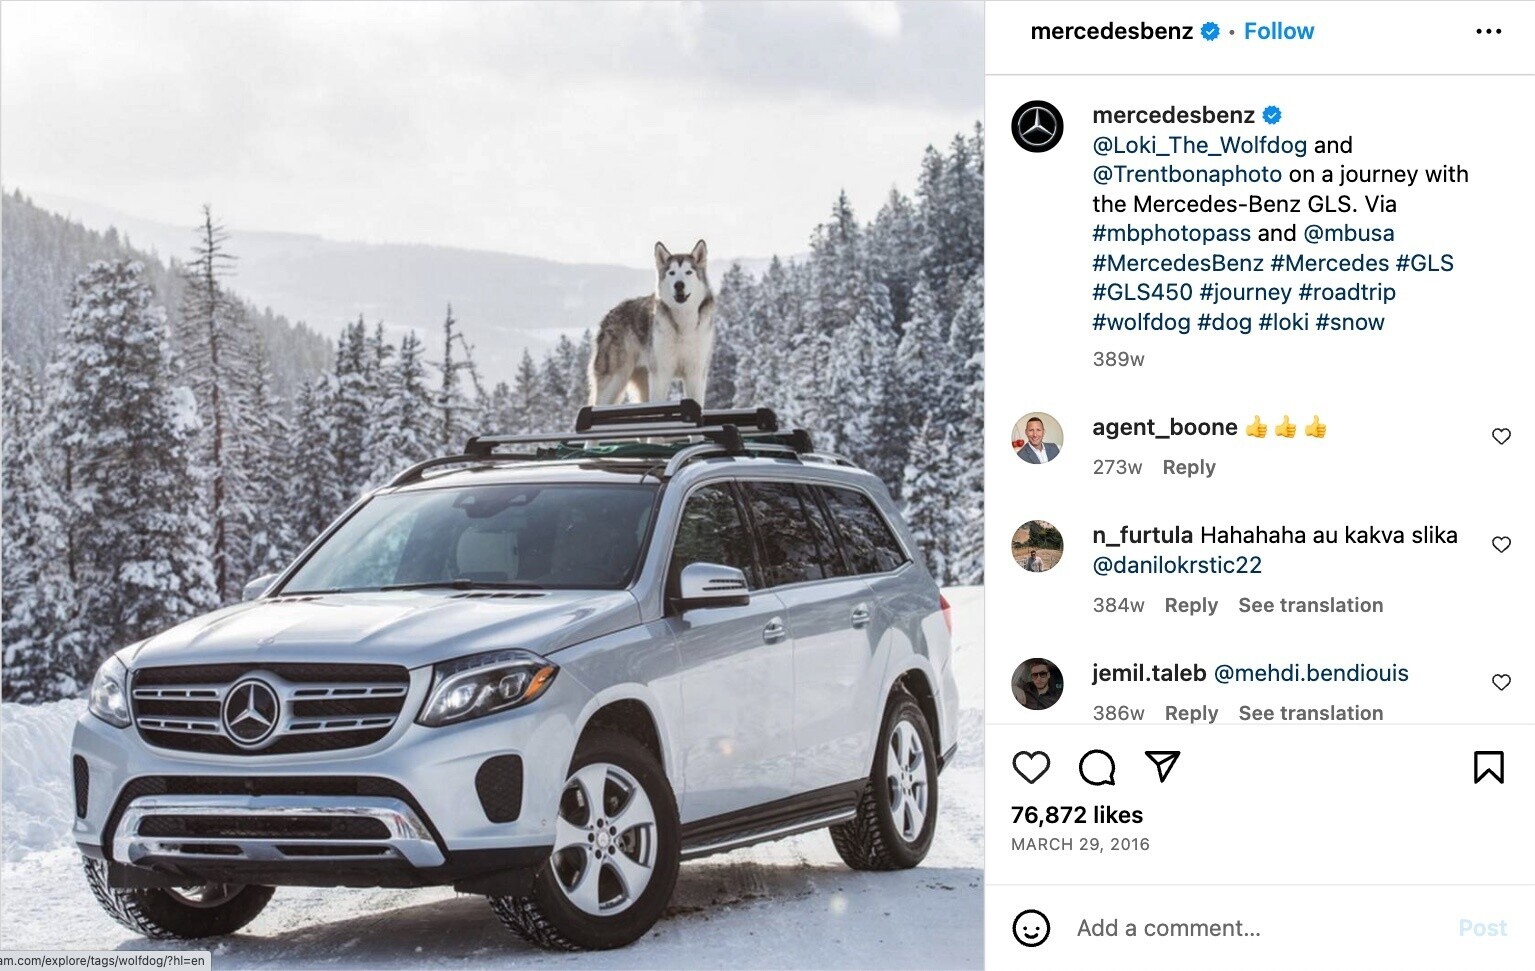 Instagram post with Mercedes-Benz GLS and Loki in snowy Colorado